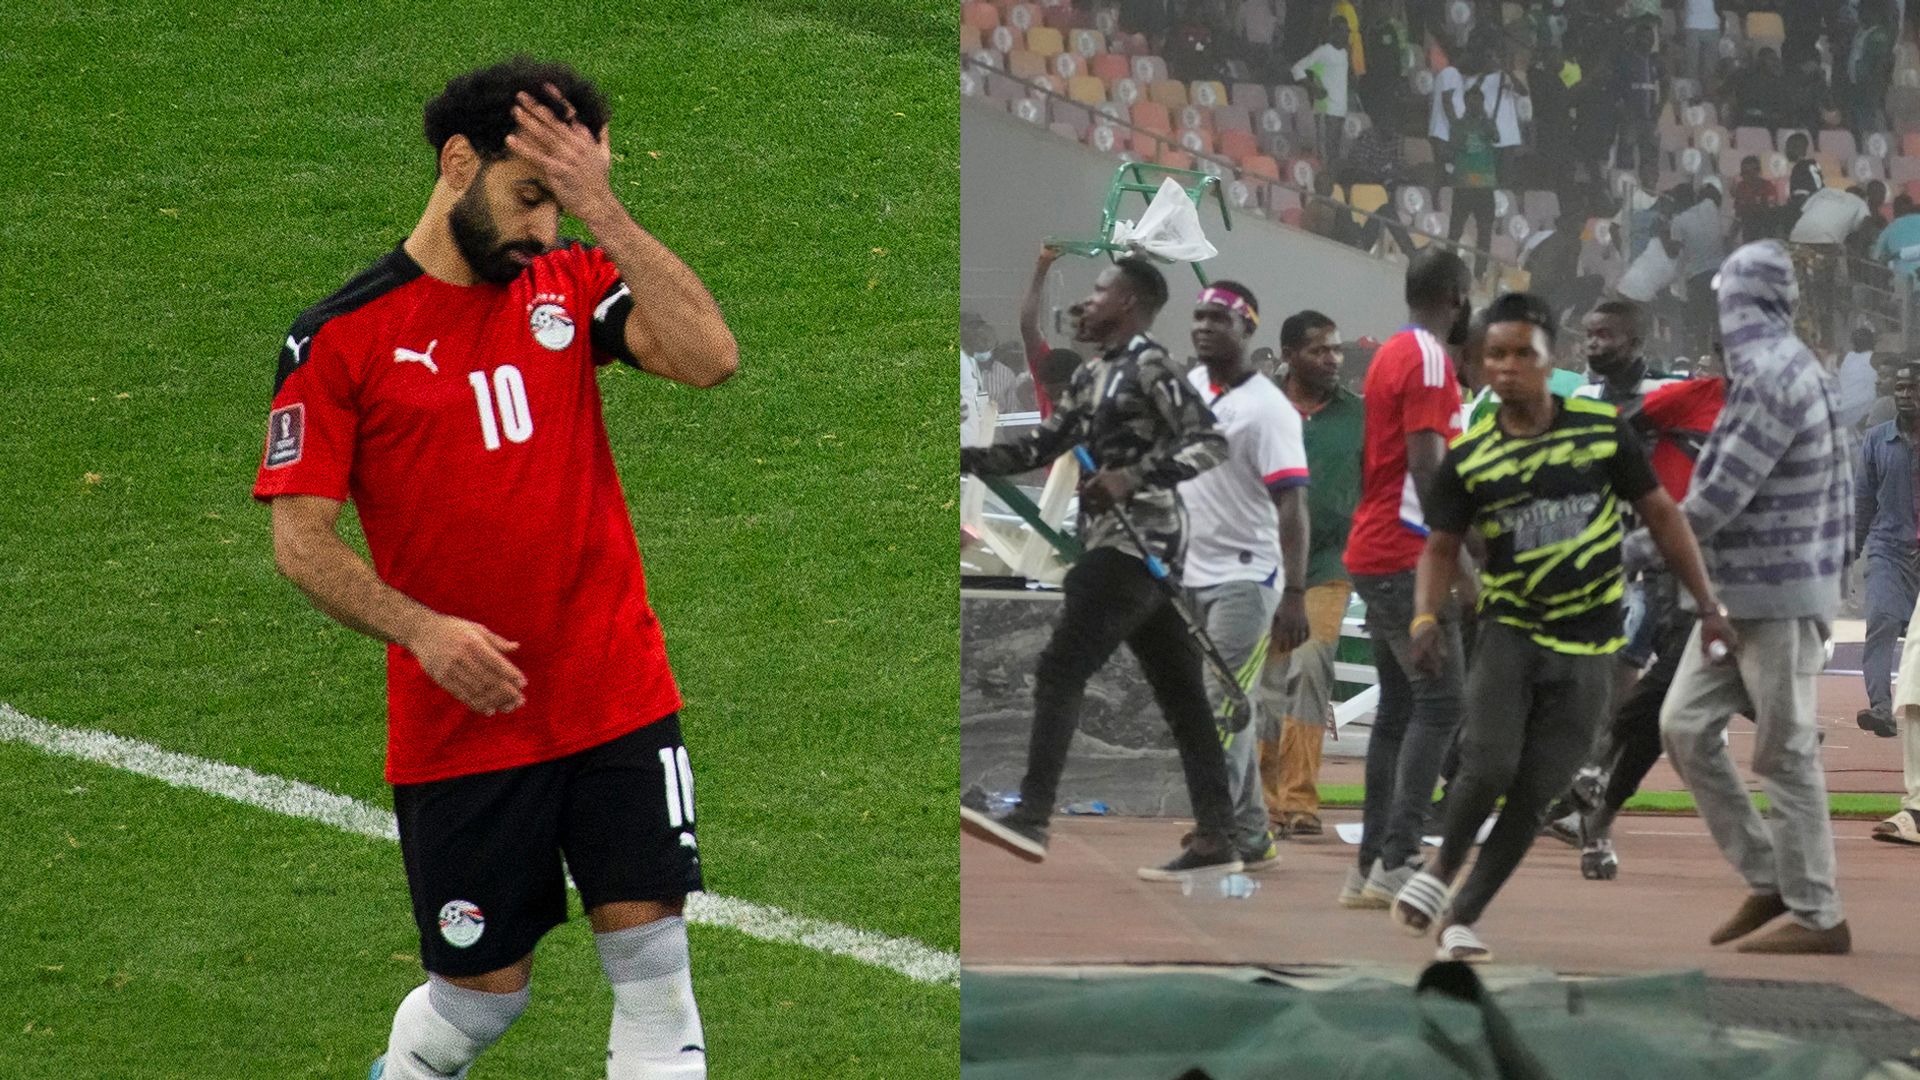 Egypt FA accuses Senegal fans of racism, attacking bus | Nigeria fans storm pitch